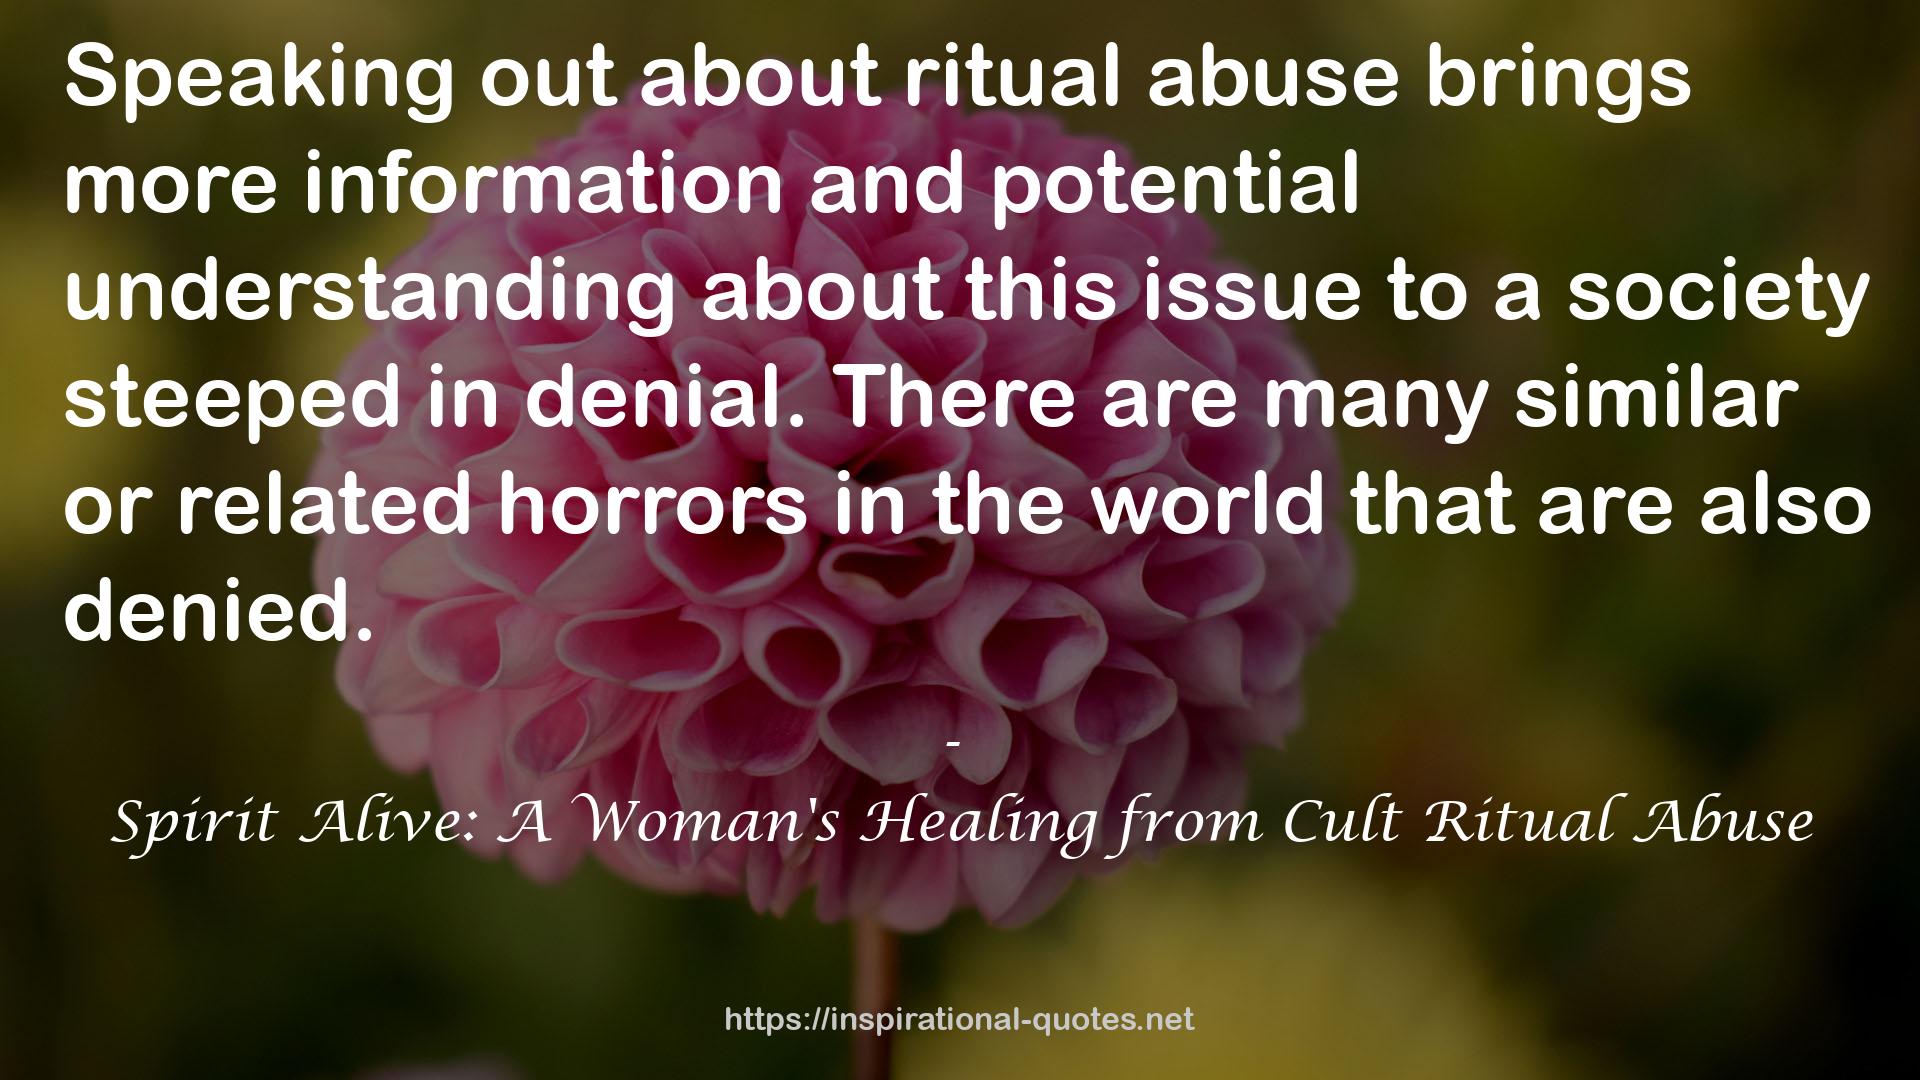 Spirit Alive: A Woman's Healing from Cult Ritual Abuse QUOTES